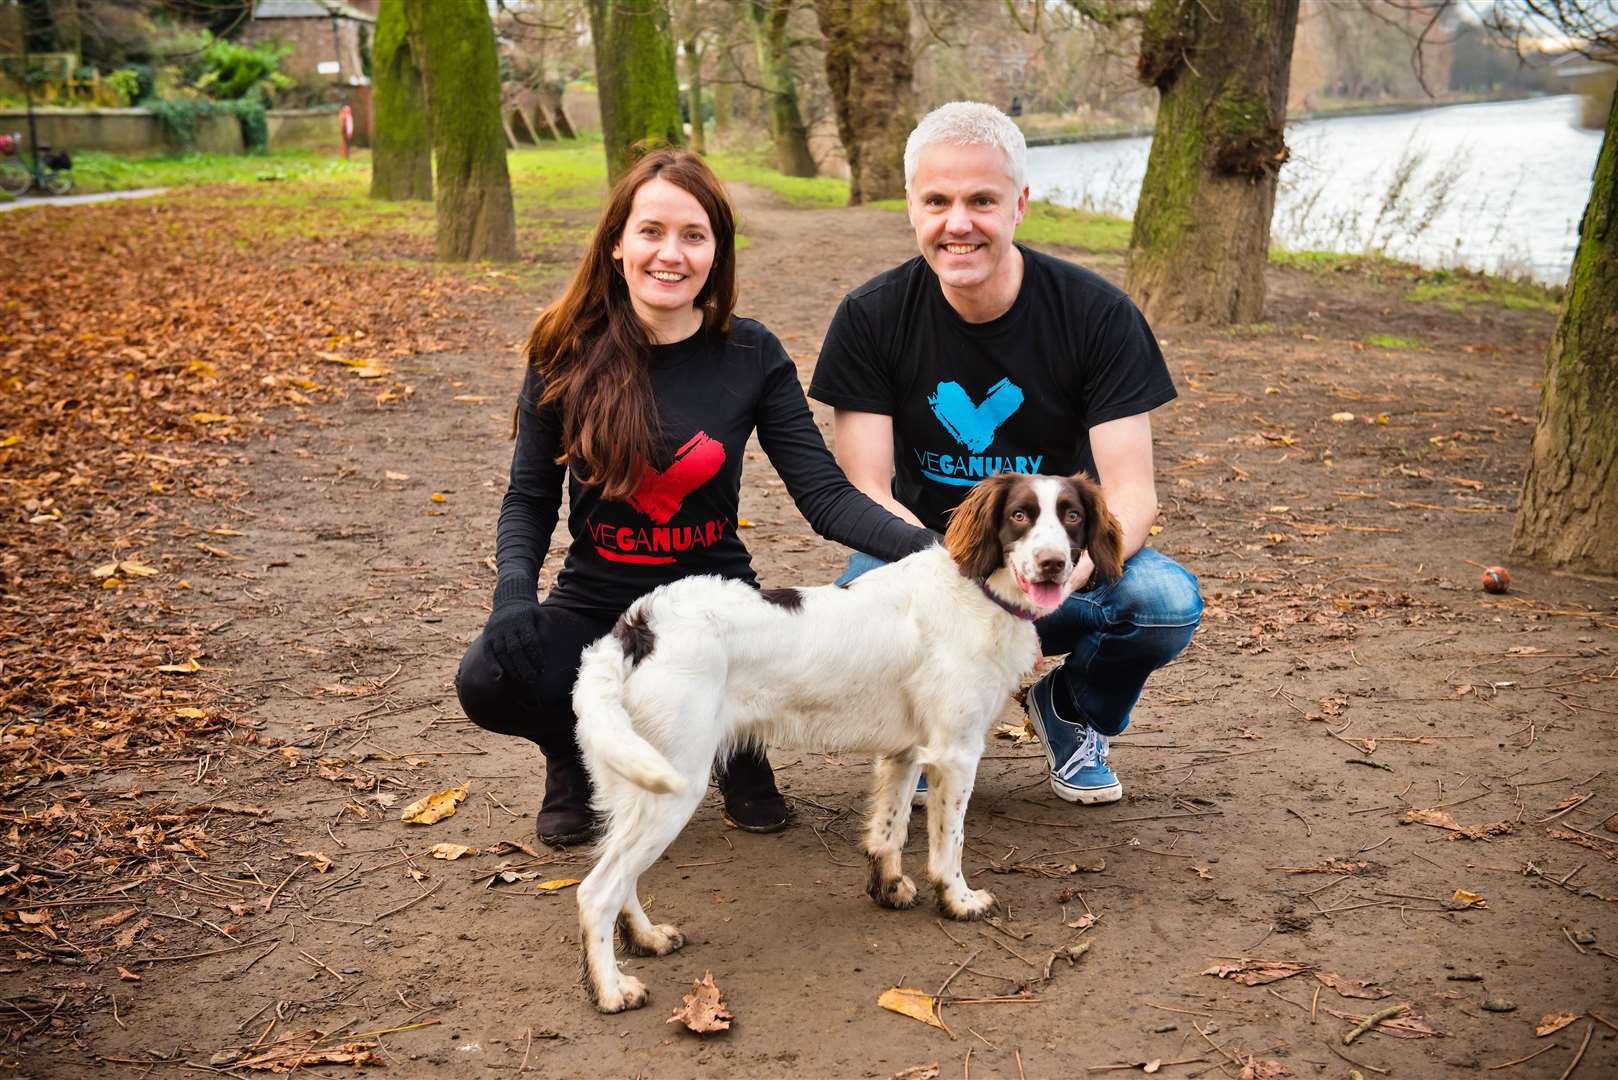 Veganuary founders Jane Land and Matthew Glover.